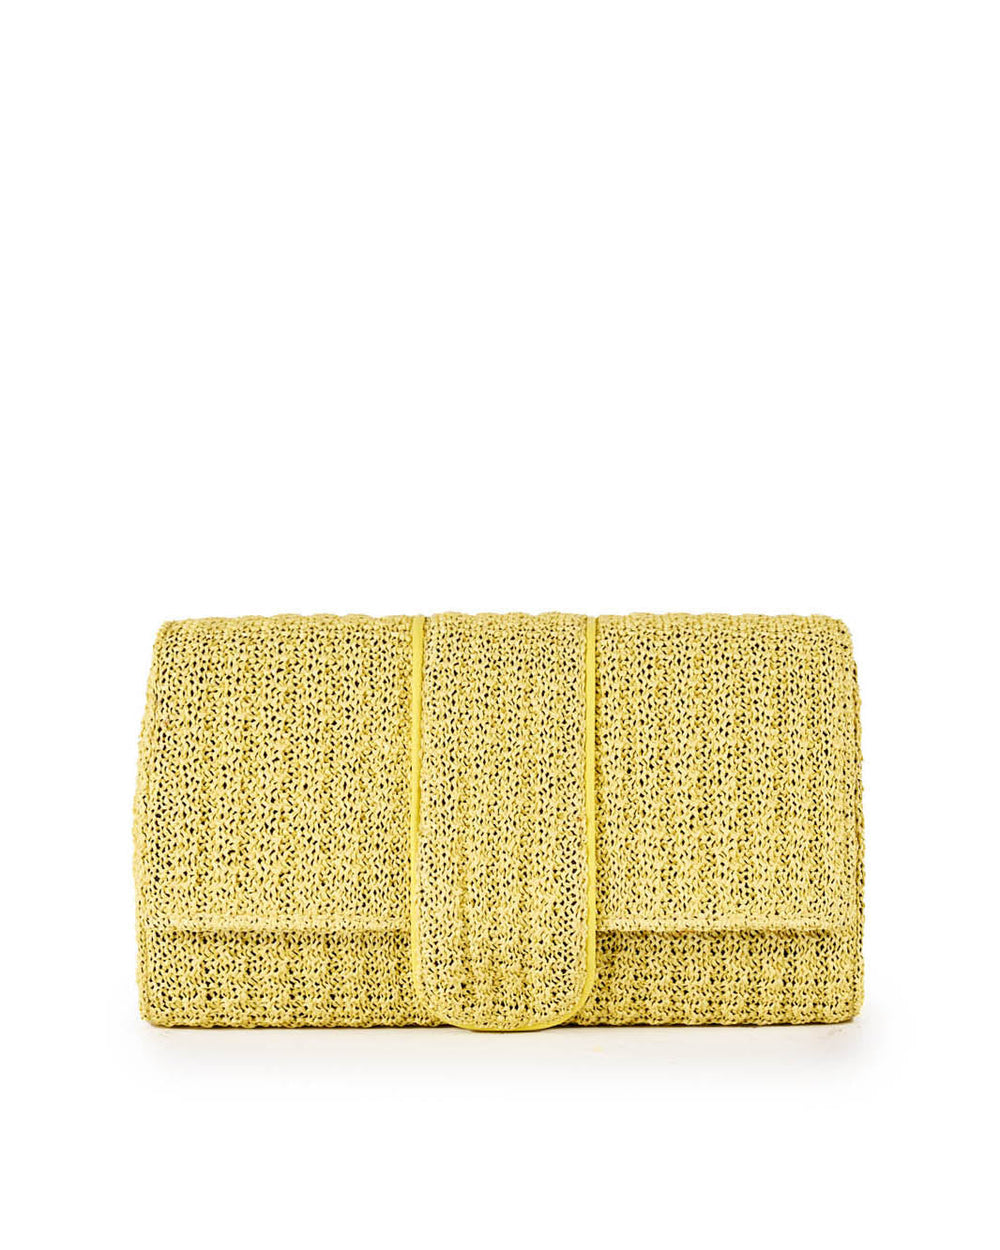 Yellow woven clutch bag with a flap closure against a white background